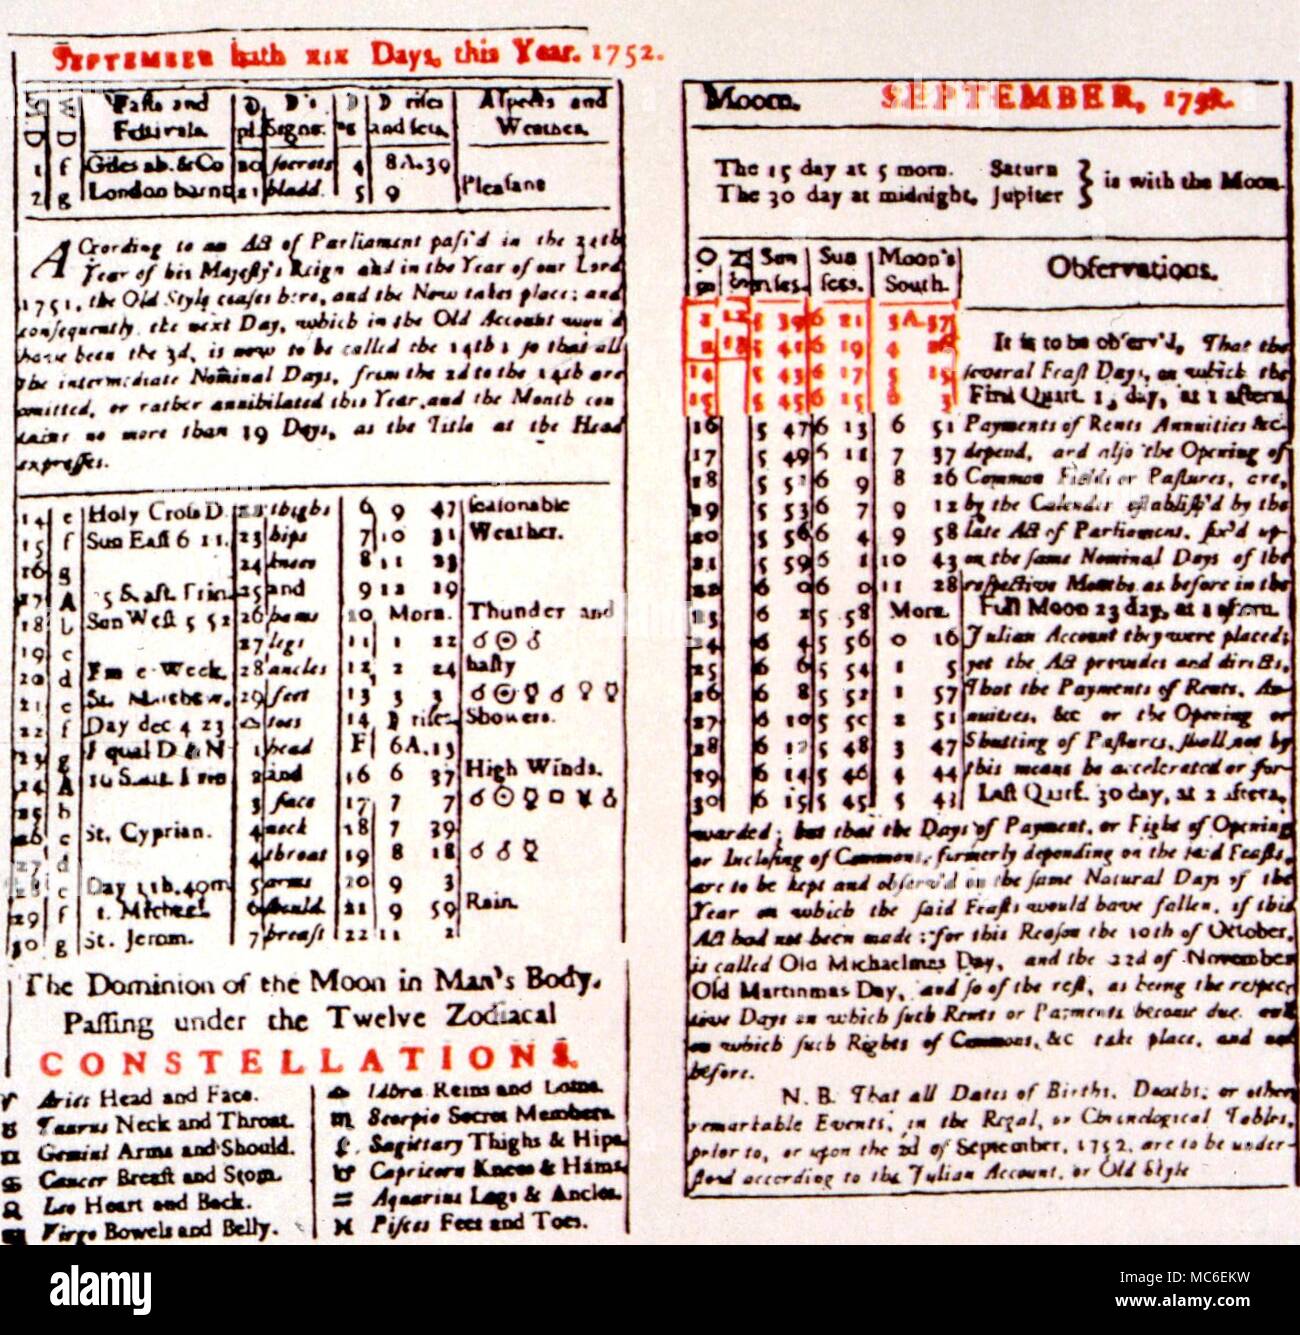 CALENDARS - The Reform of 1752. Almanac for 1752, with details of the month of September, uniquely with a length of 19 days. This is the last British calendrical reform, based on the Gregorian reform of 1582 Stock Photo